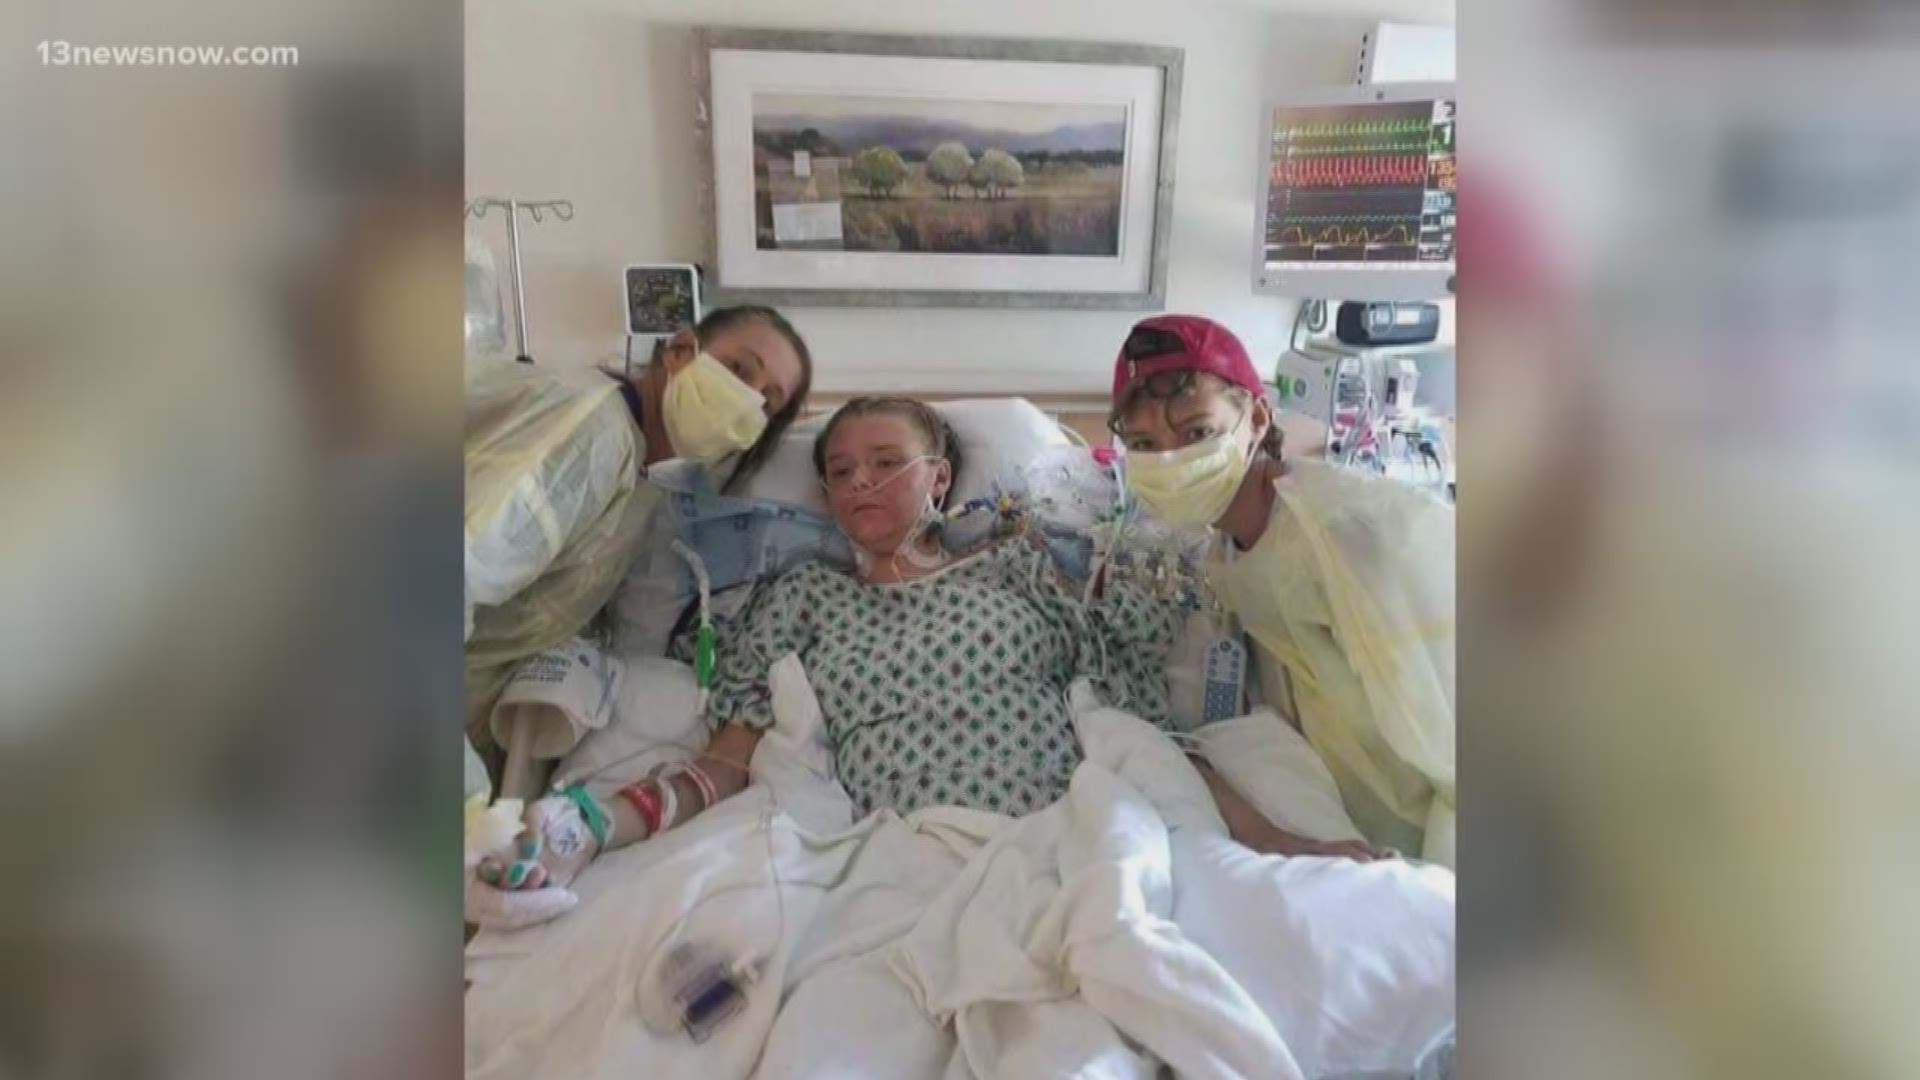 17-year-old Hannah Goetz had been sedated since doctors gave her a new set of lungs, last week. She underwent the transplant and now she's awake.